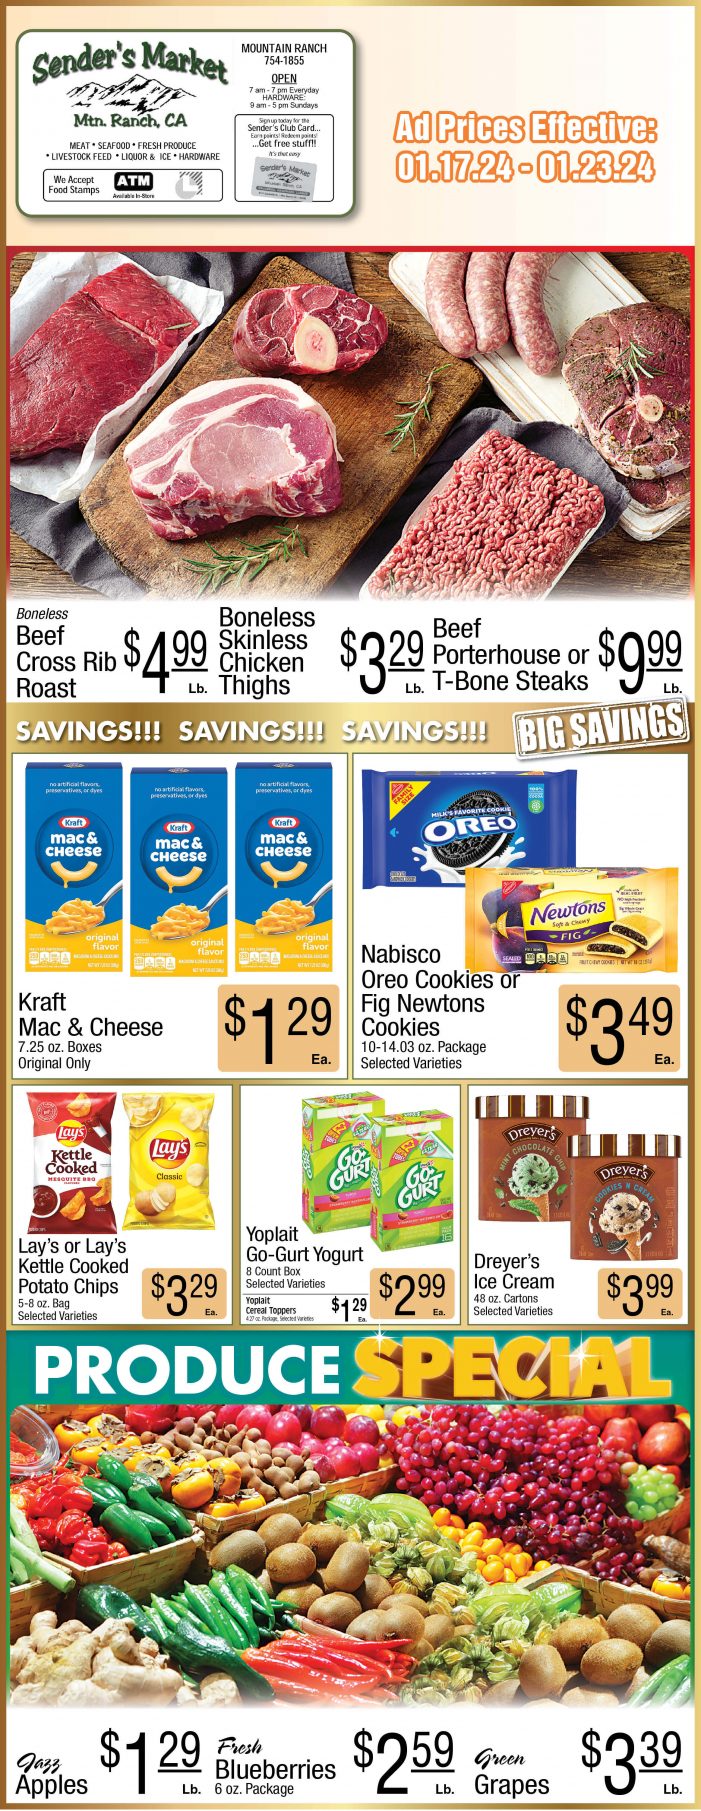 Sender’s Market Weekly Ad & Grocery Specials Through January 23rd! Shop Local & Save!!